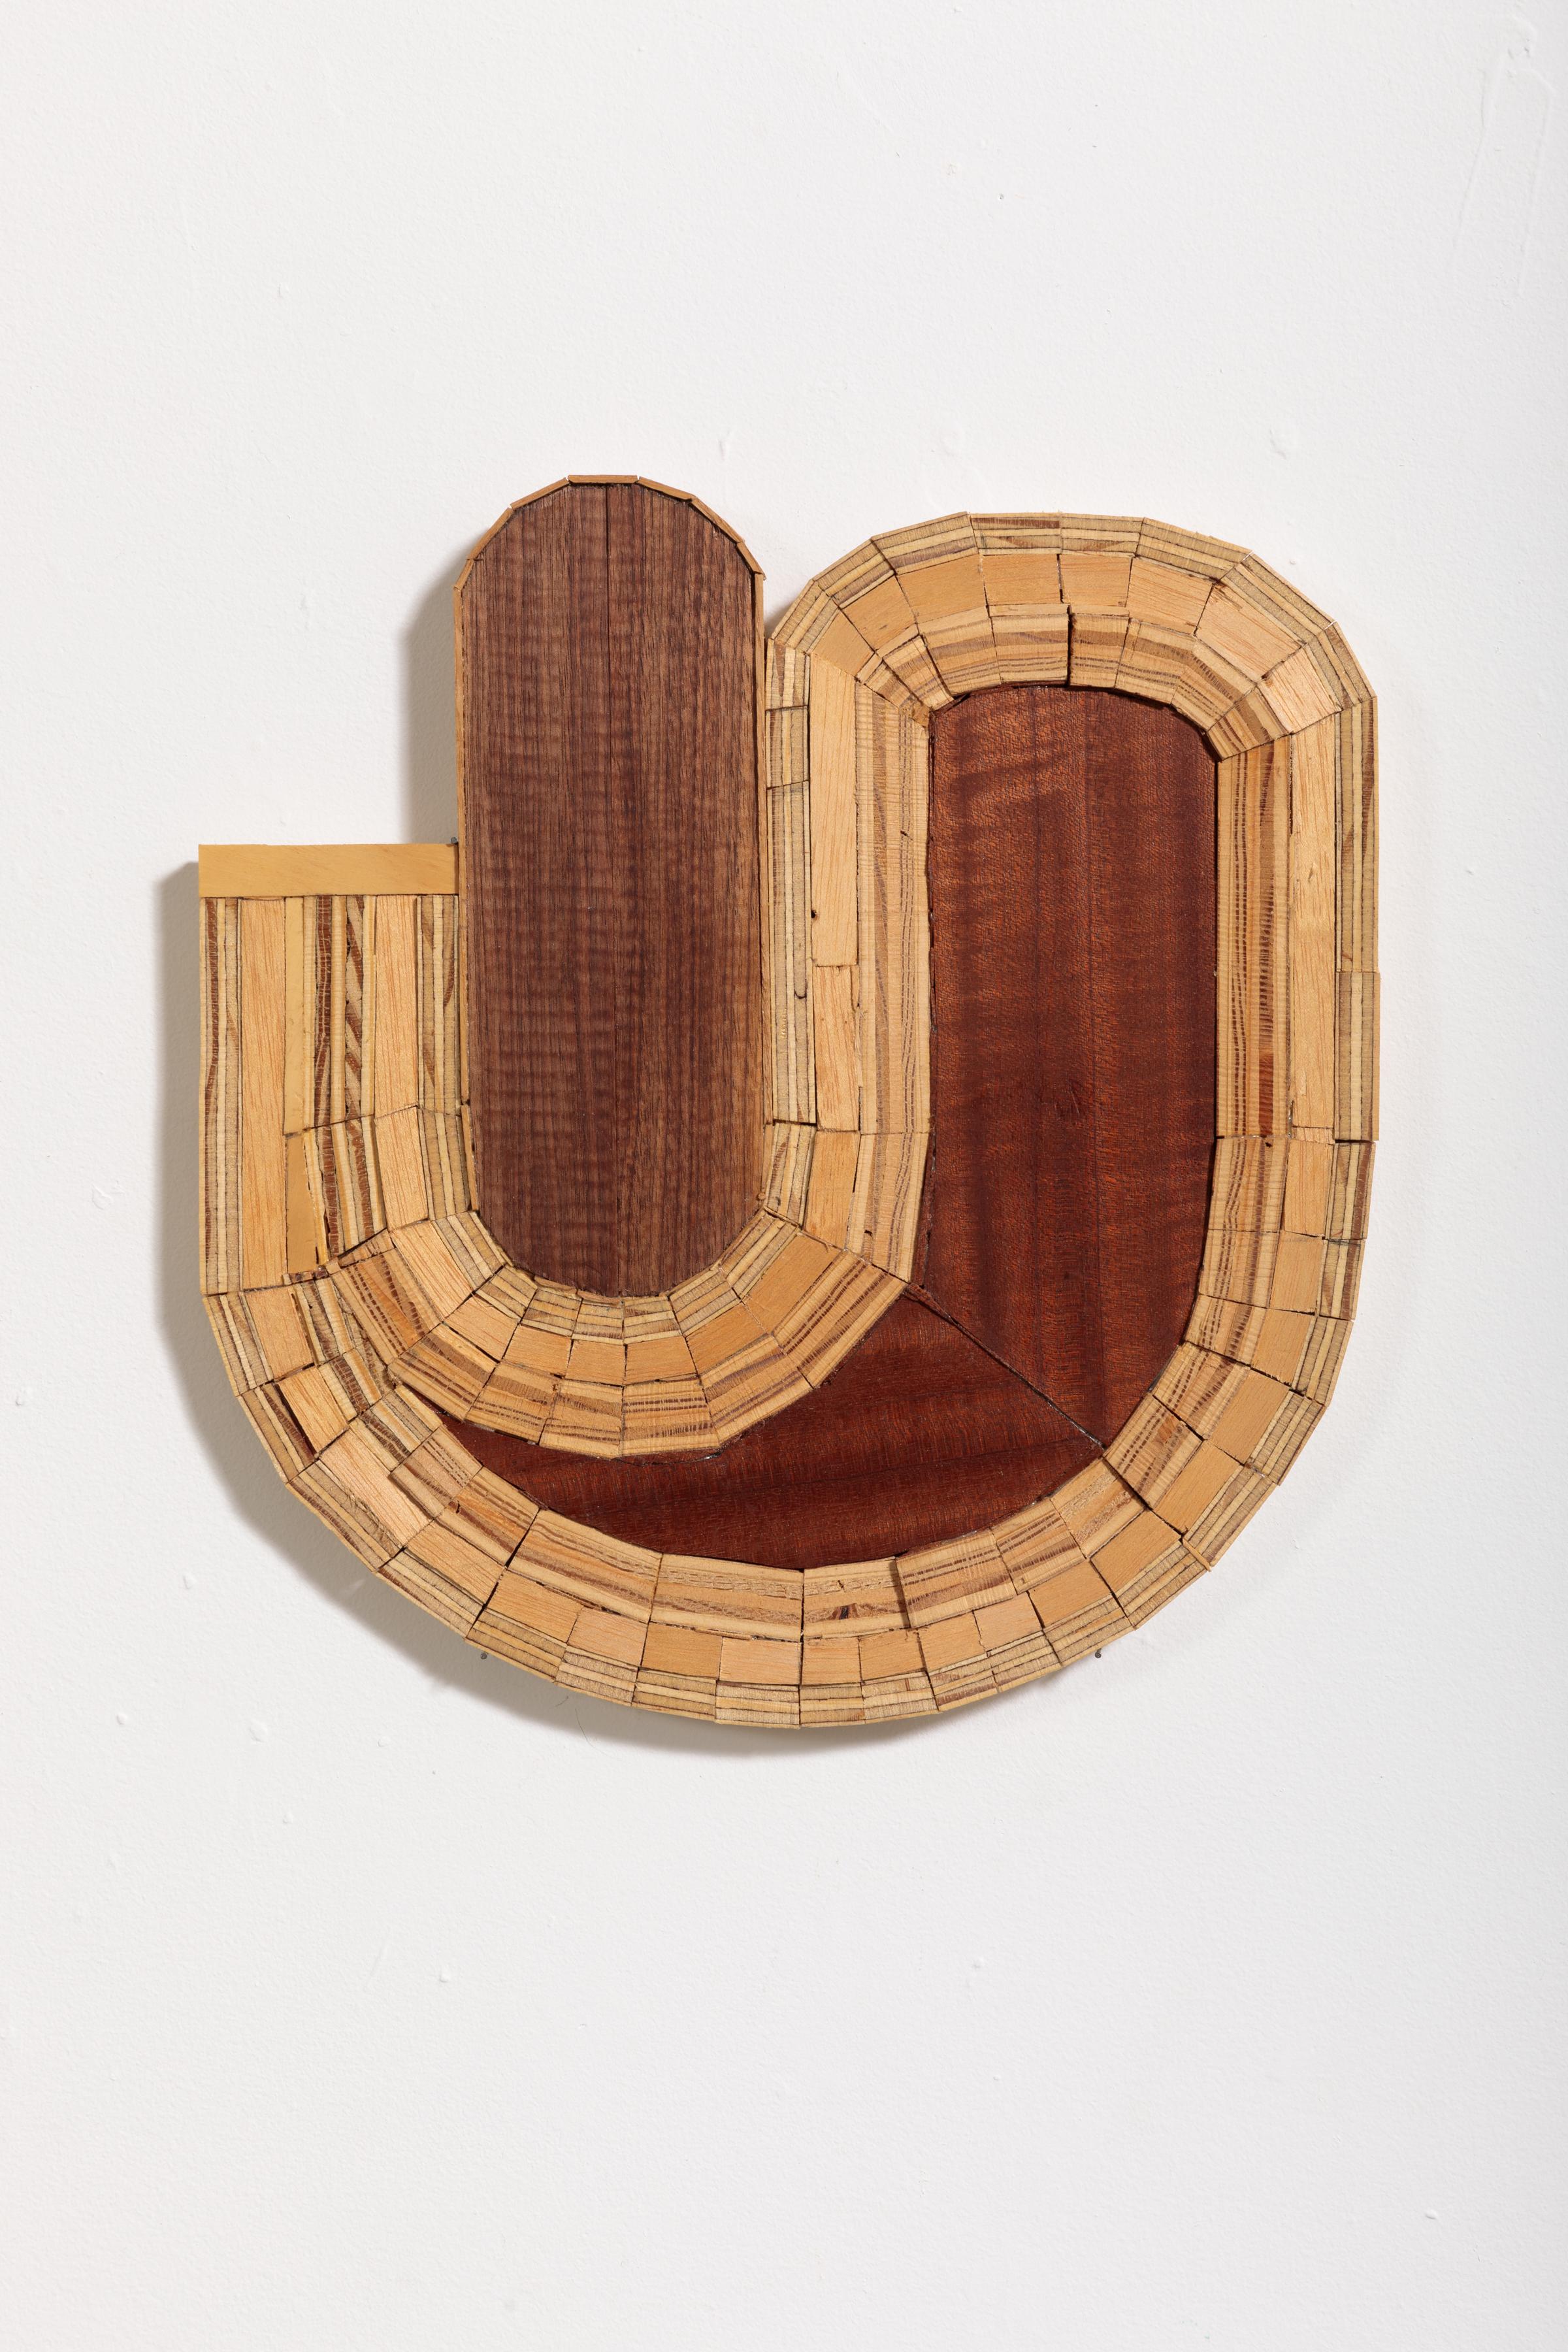 Stephanie Beck Abstract Sculpture - Mosaic #3, Sculptural “Drawings"  Made of Plywood, Wood, Glue, and Mineral Oil 